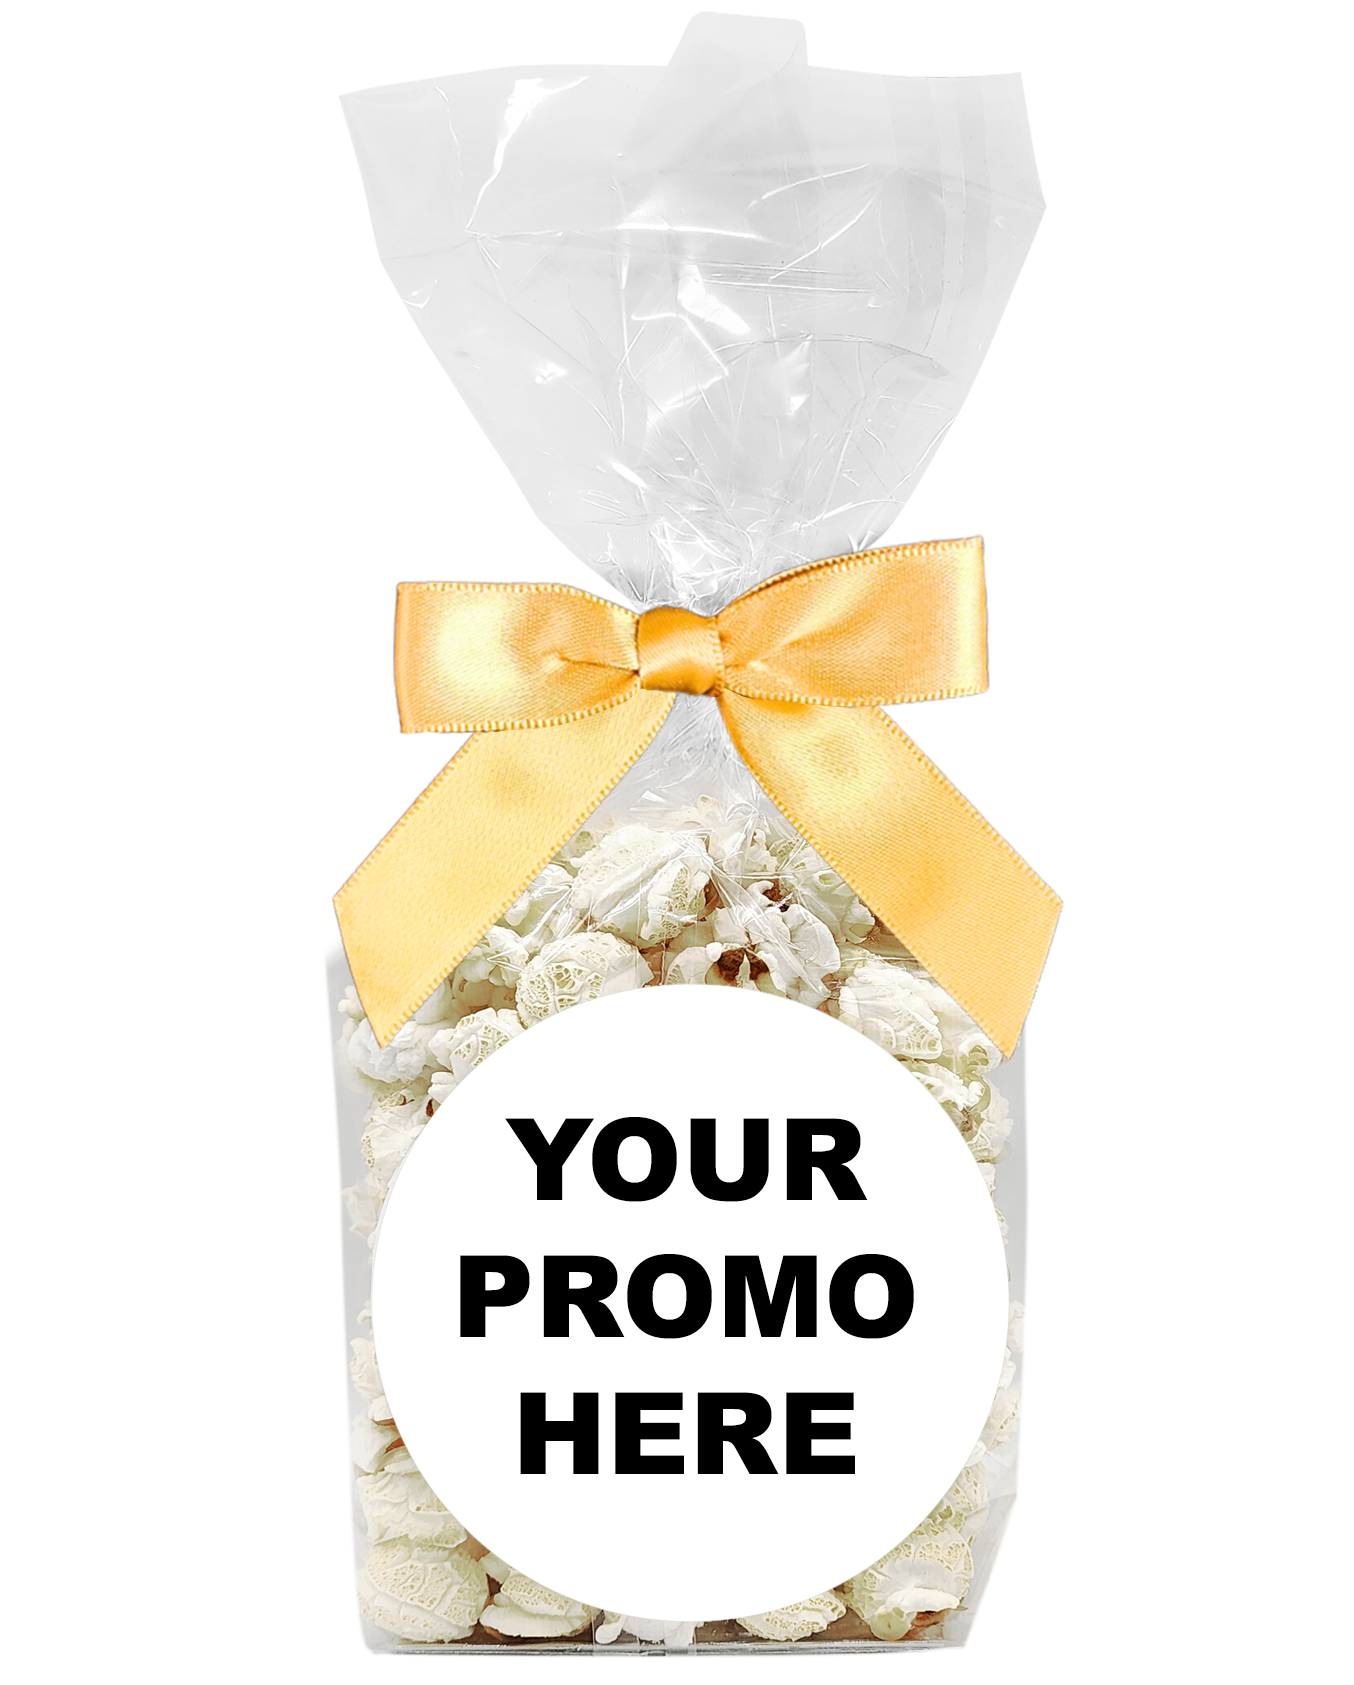 Kettle Clouds™ - White Cheddar Bags & Bows (as low as $4.49 per bag) Case of 12 Price